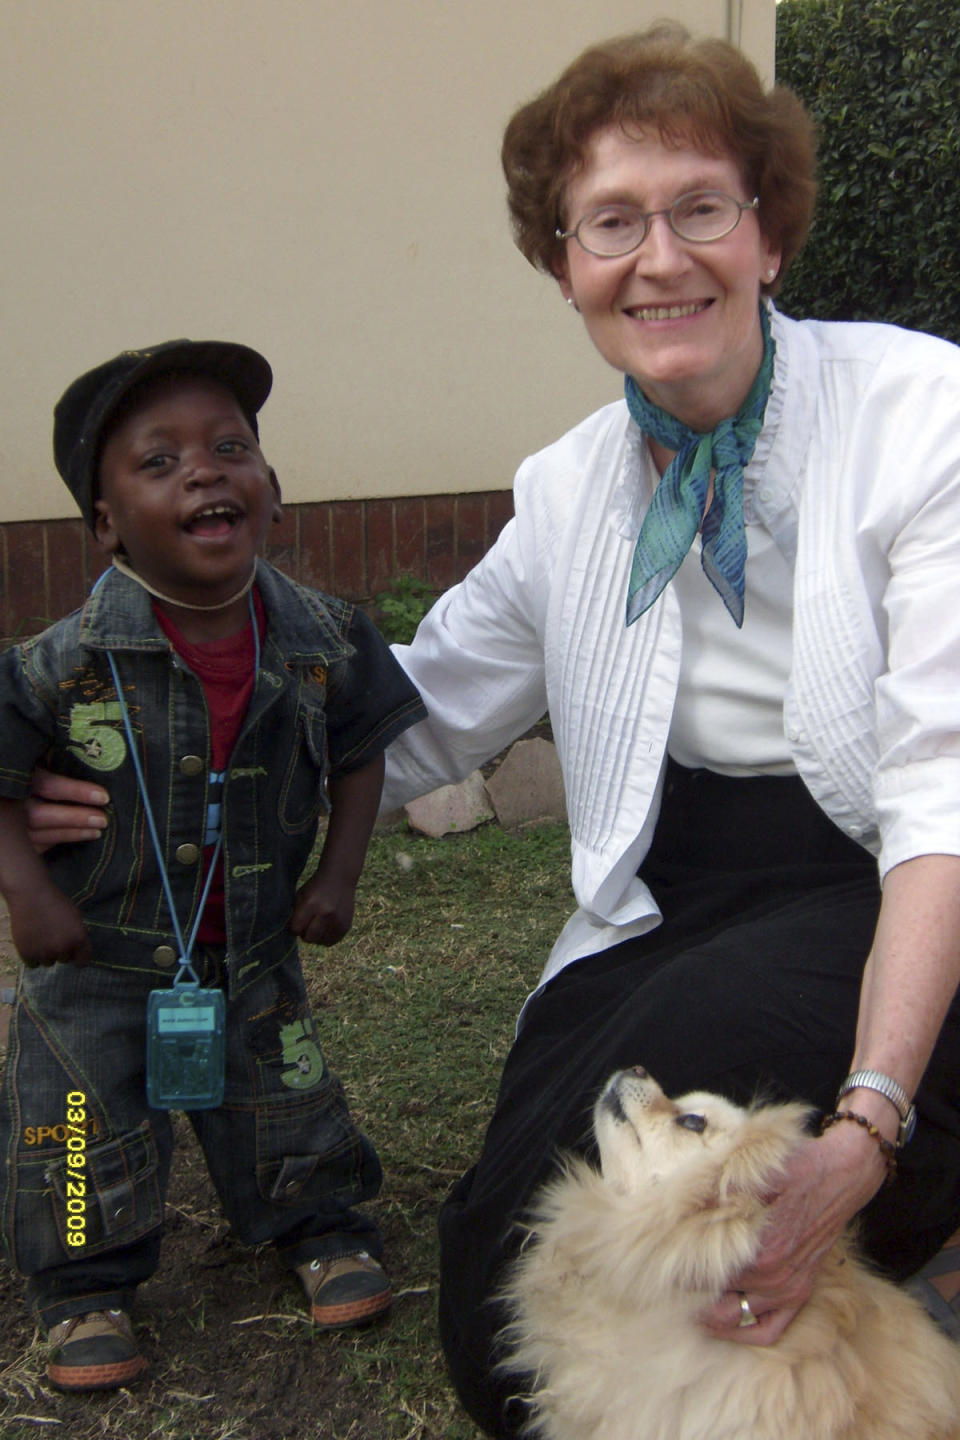 This 2012 photo provided by the Maryknoll Sisters shows Sister Janice McLaughlin with a child in Zimbabwe. McLaughlin, a nun who was jailed and later deported by white minority-ruled Rhodesia, later Zimbabwe, for exposing human rights abuses, died on March 7, 2021, in Maryknoll, N.Y. She was 79. (Maryknoll Sisters via AP)